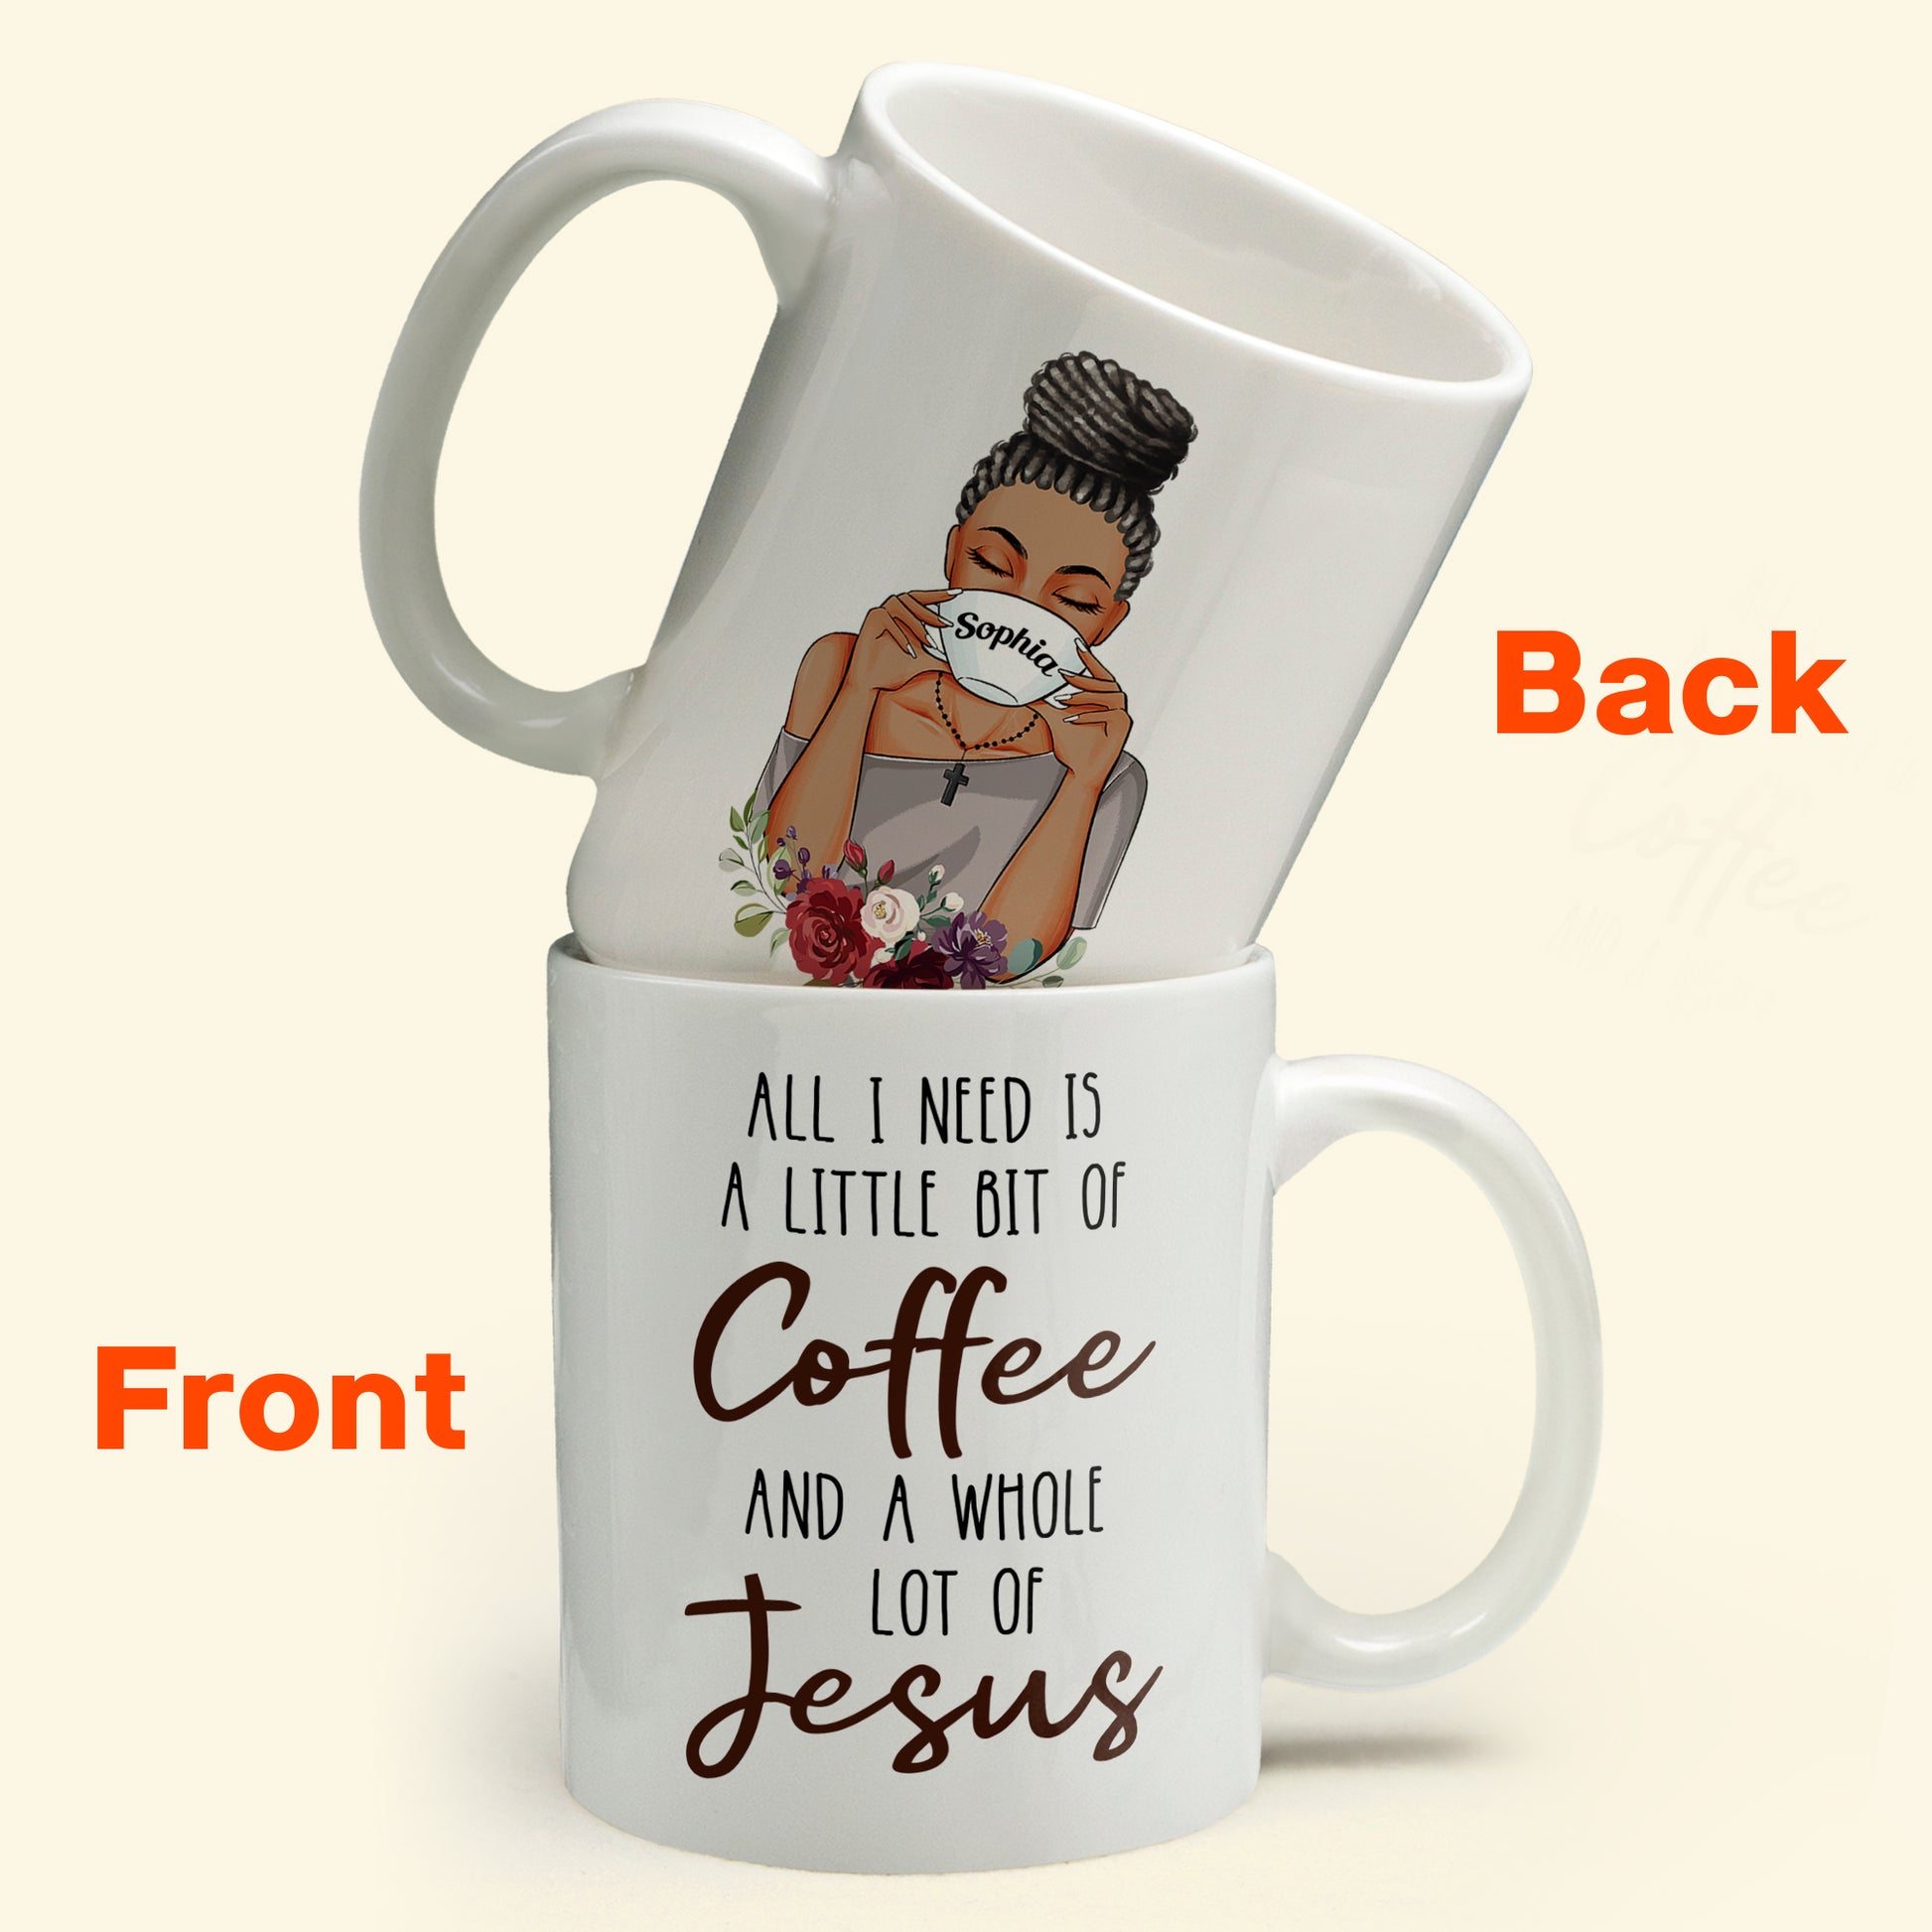 All I Need Is A Little Bit Of Coffee And A Whole Lot Of Jesus - Personalized Mug - Birthday & Christmas Gift For Her, Girl, Woman